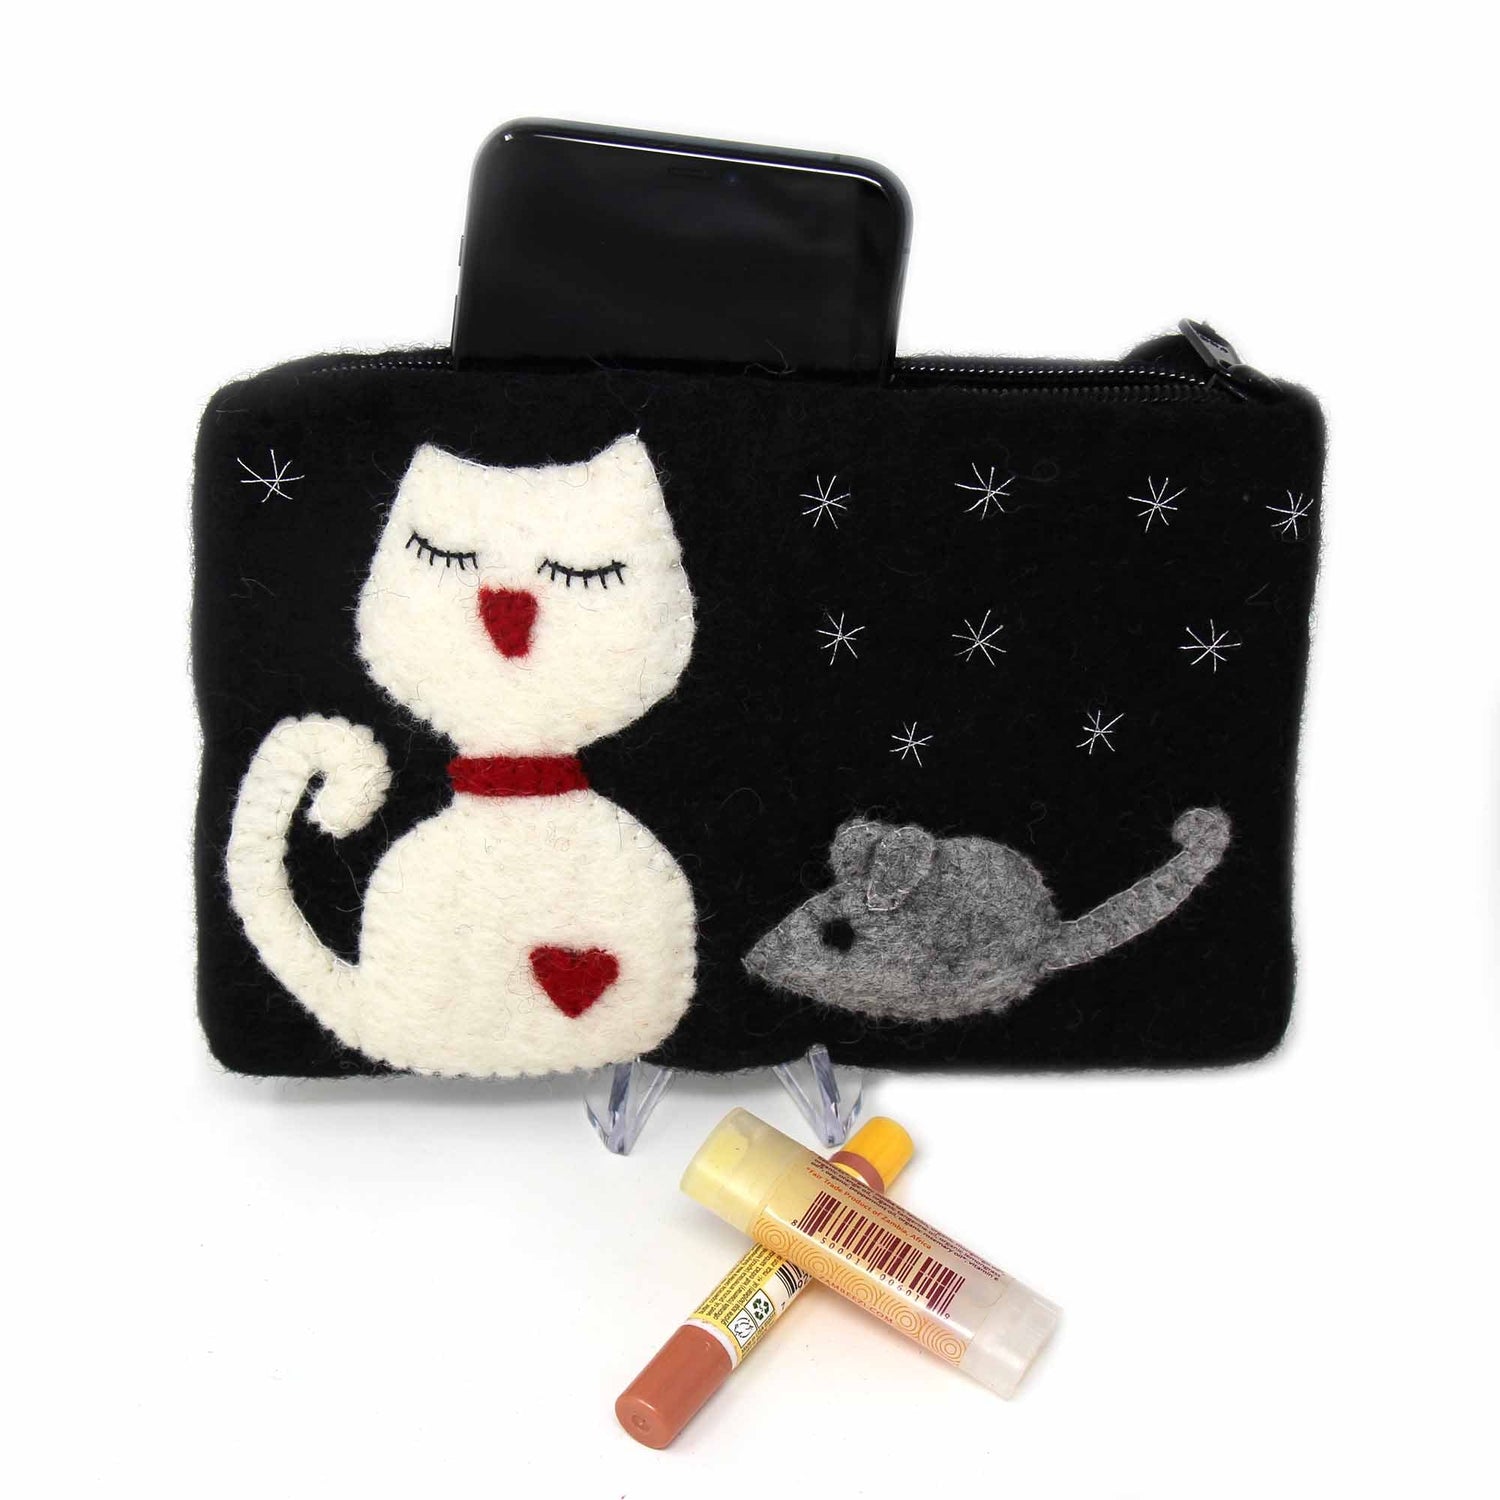 hand-crafted-felt-white-cat-pouch